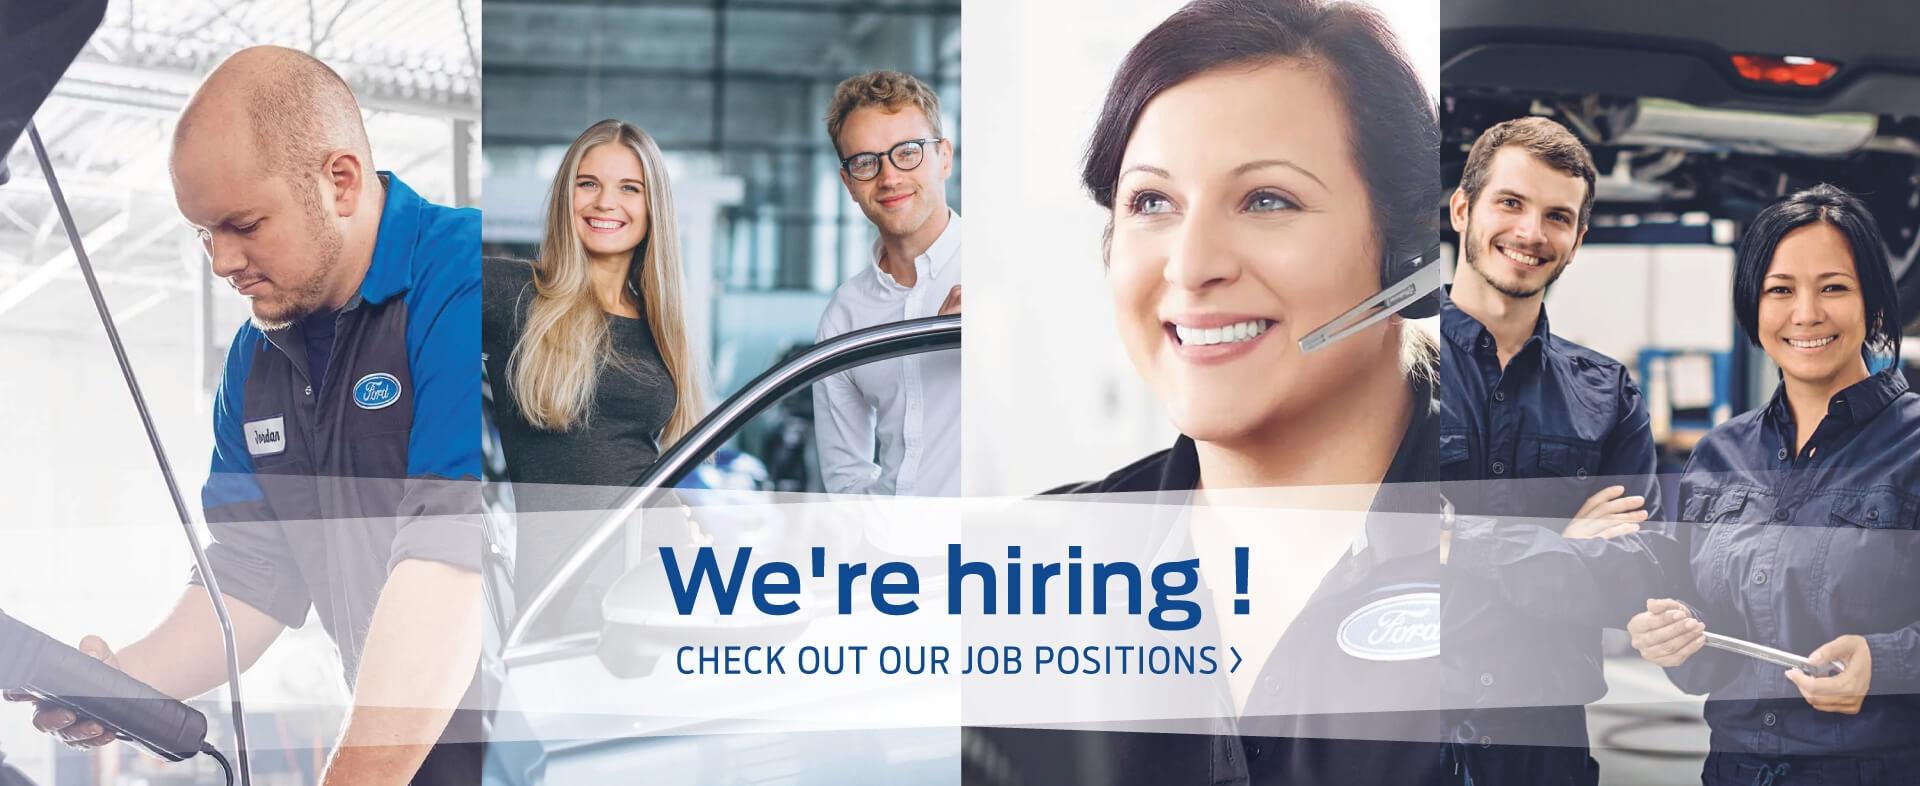 Ford Employees Hiring